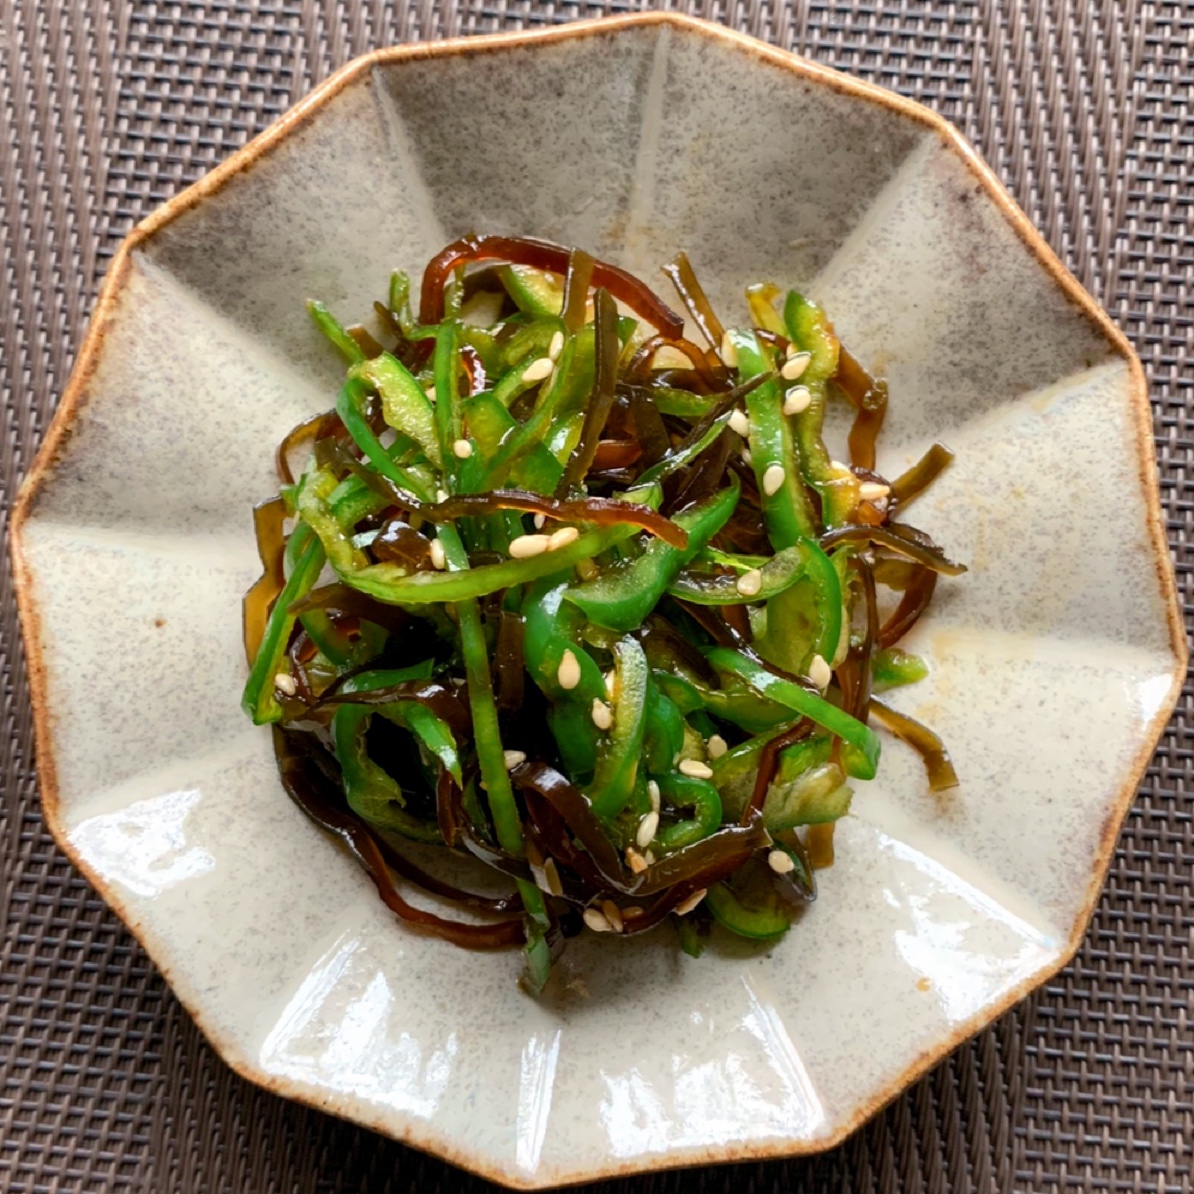 Thinly sliced green pepper mixed with shiso konbu.